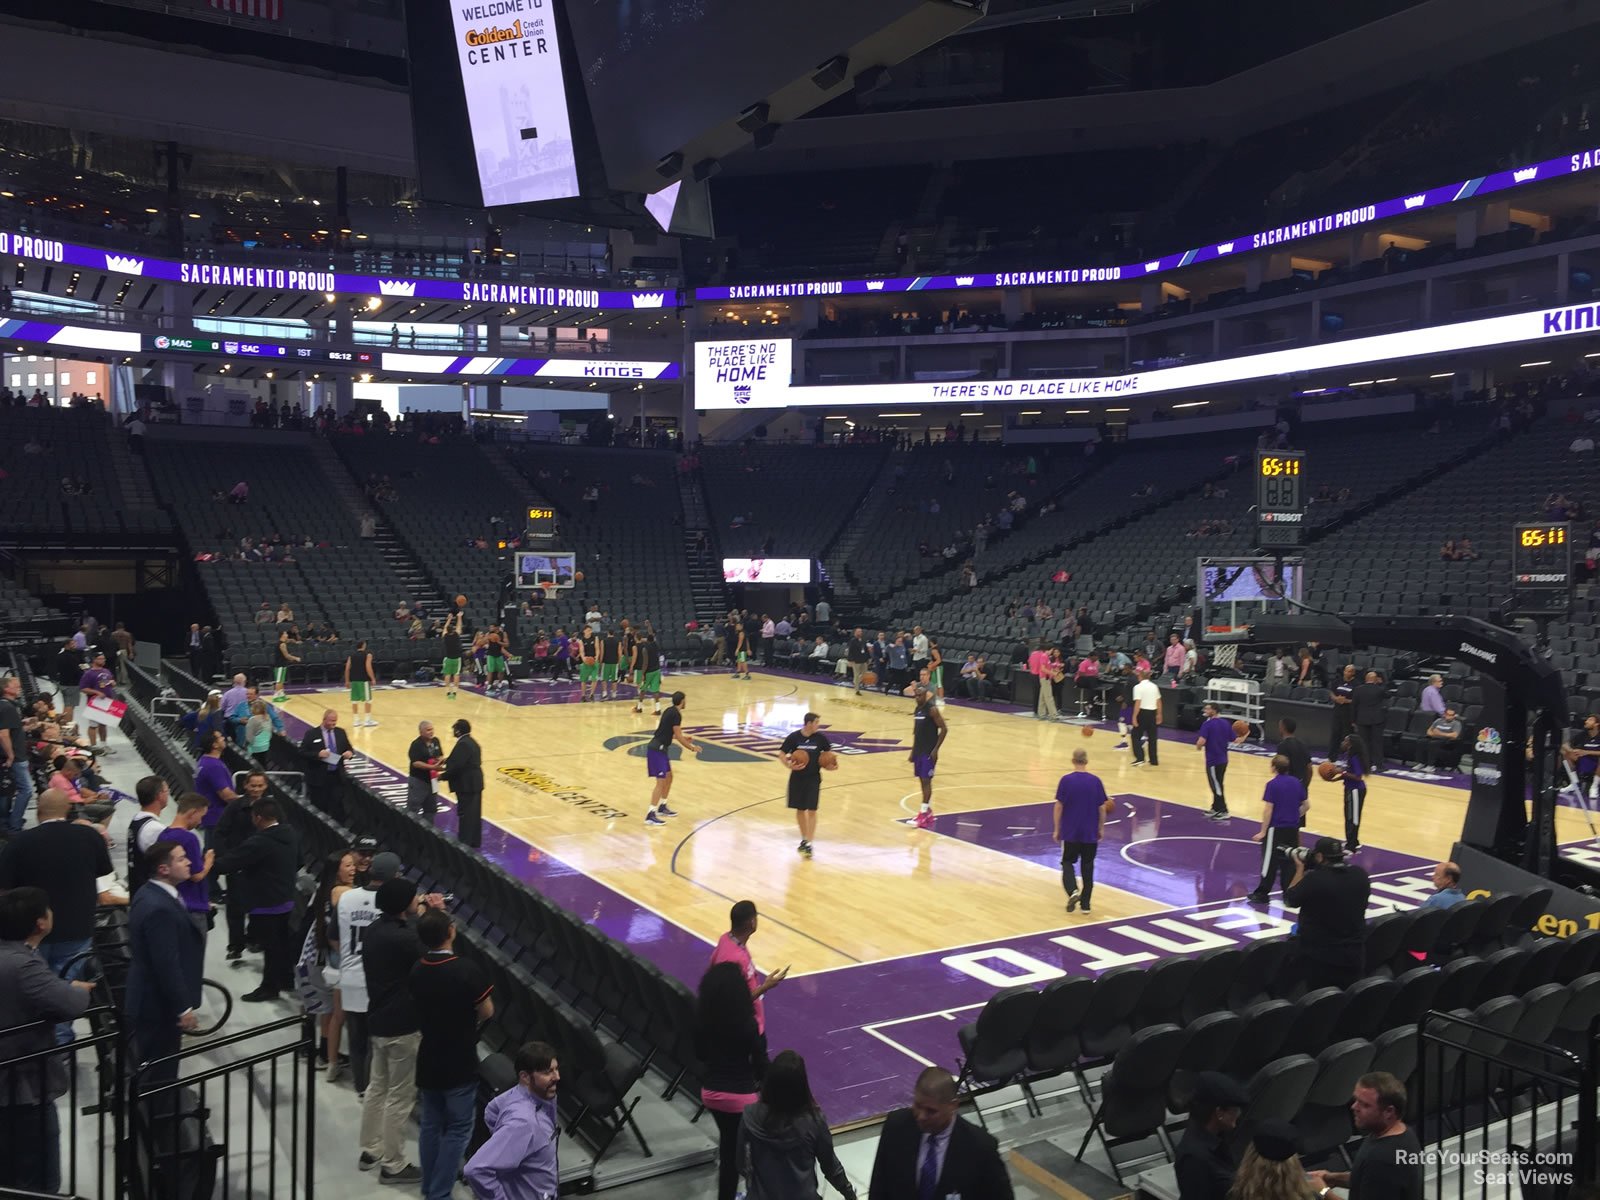 section 116, row dd seat view  for basketball - golden 1 center